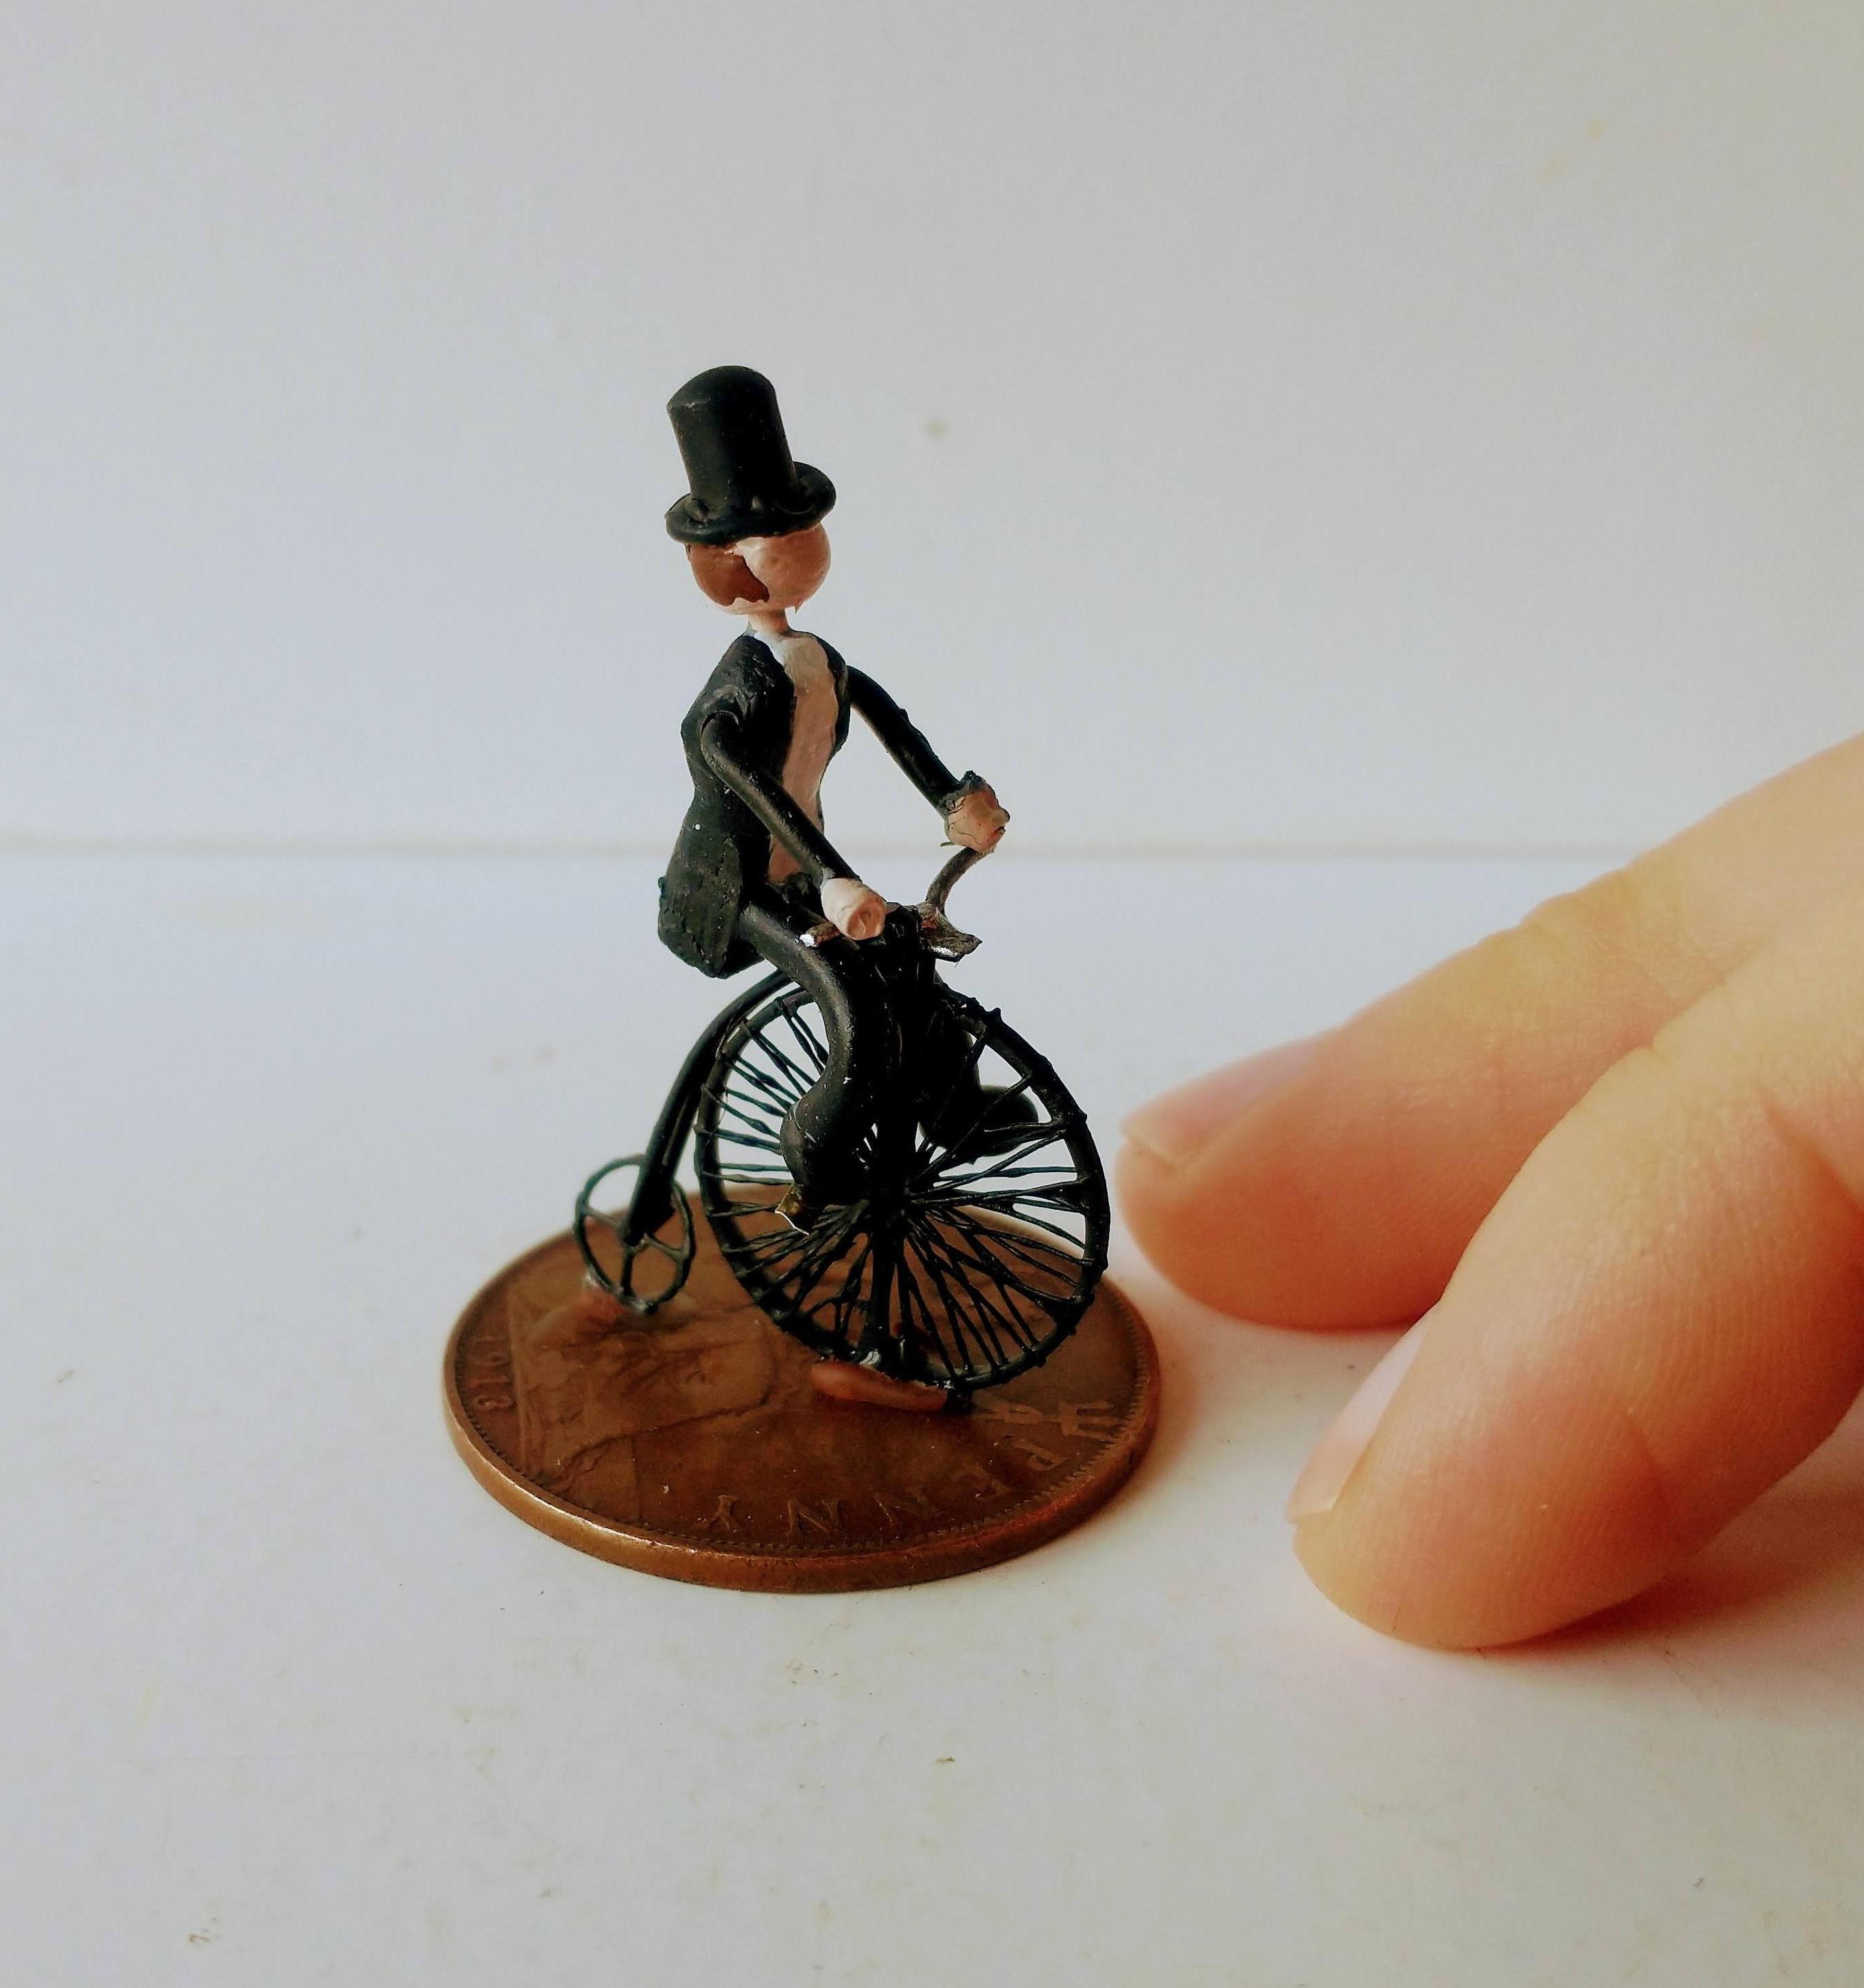 Tiny Penny Farthing Bicycle Made From Pocket Watch Gears - Small Enough to Put on an Old Penny